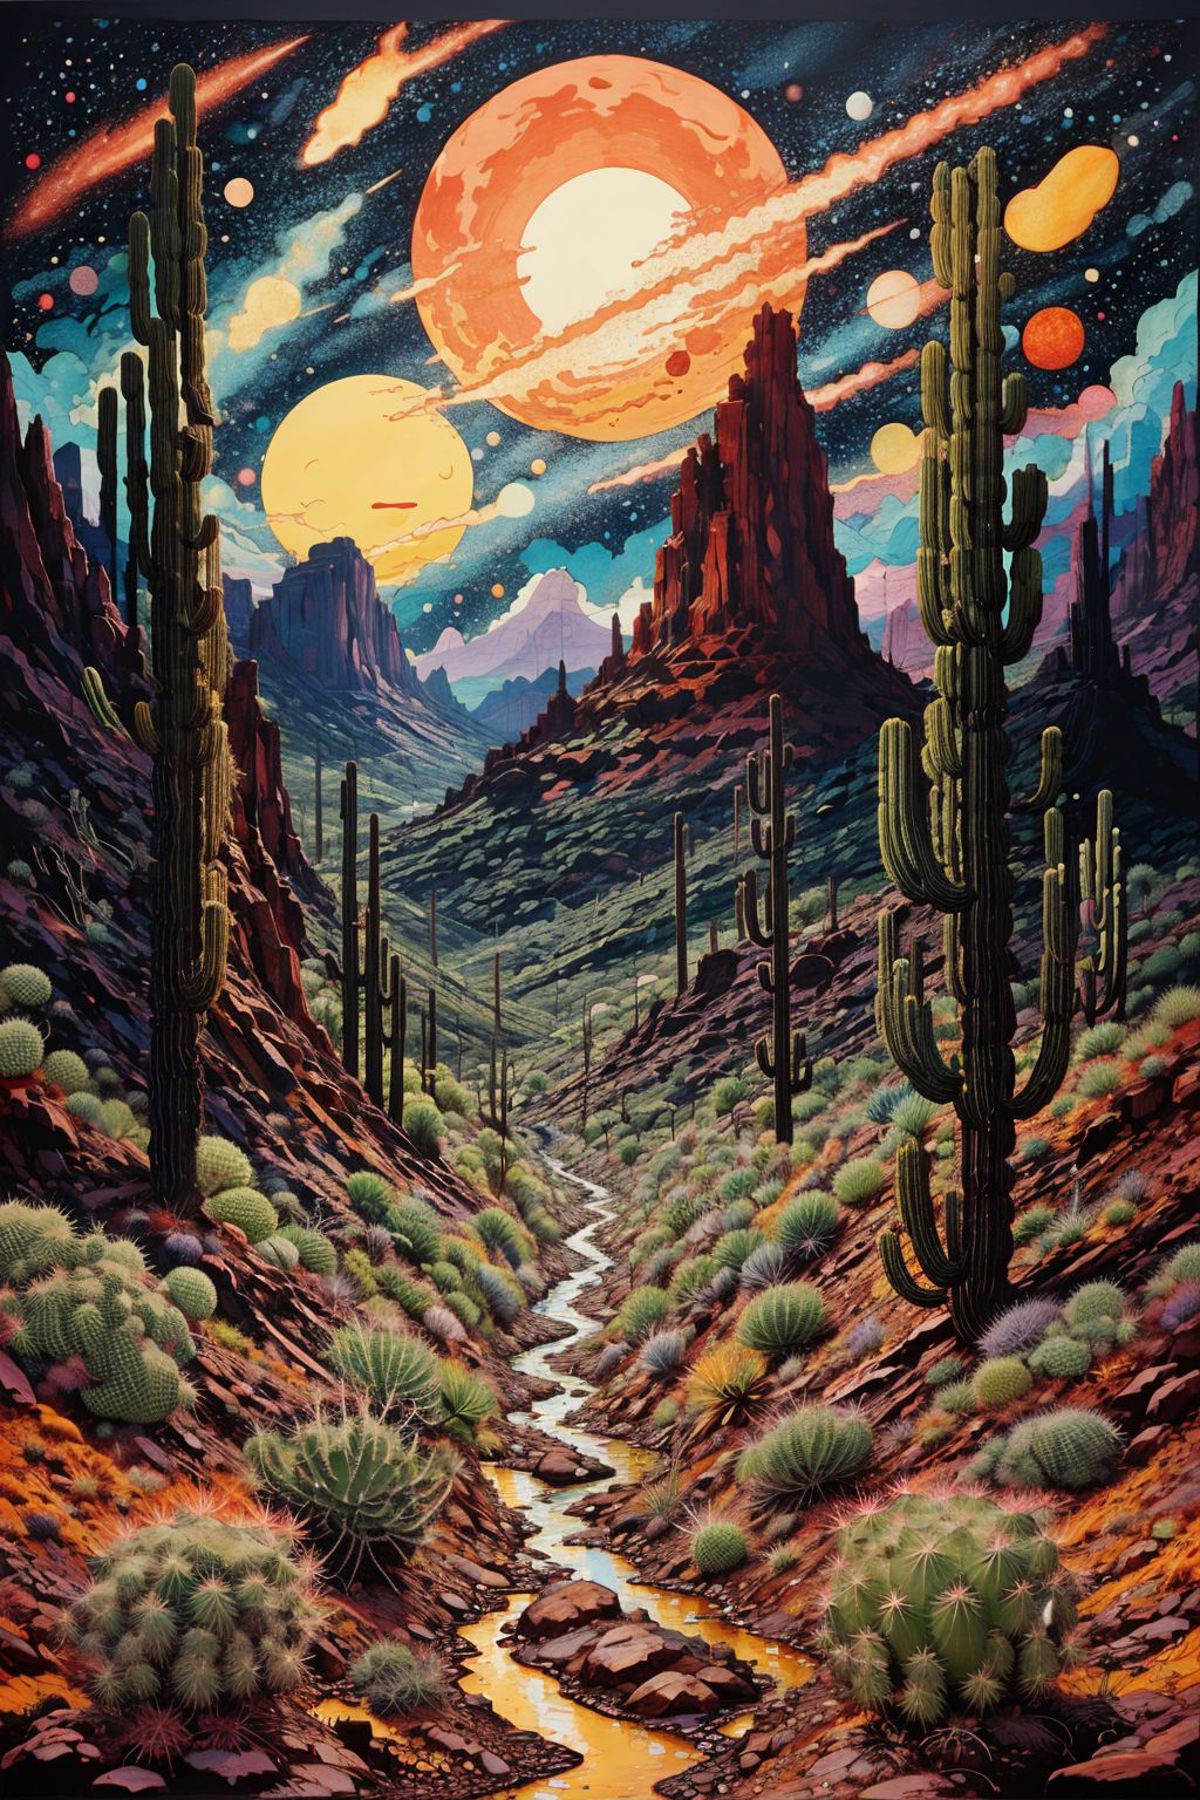 Artistic Desert Landscape with Mountain Range and Cactus Trees